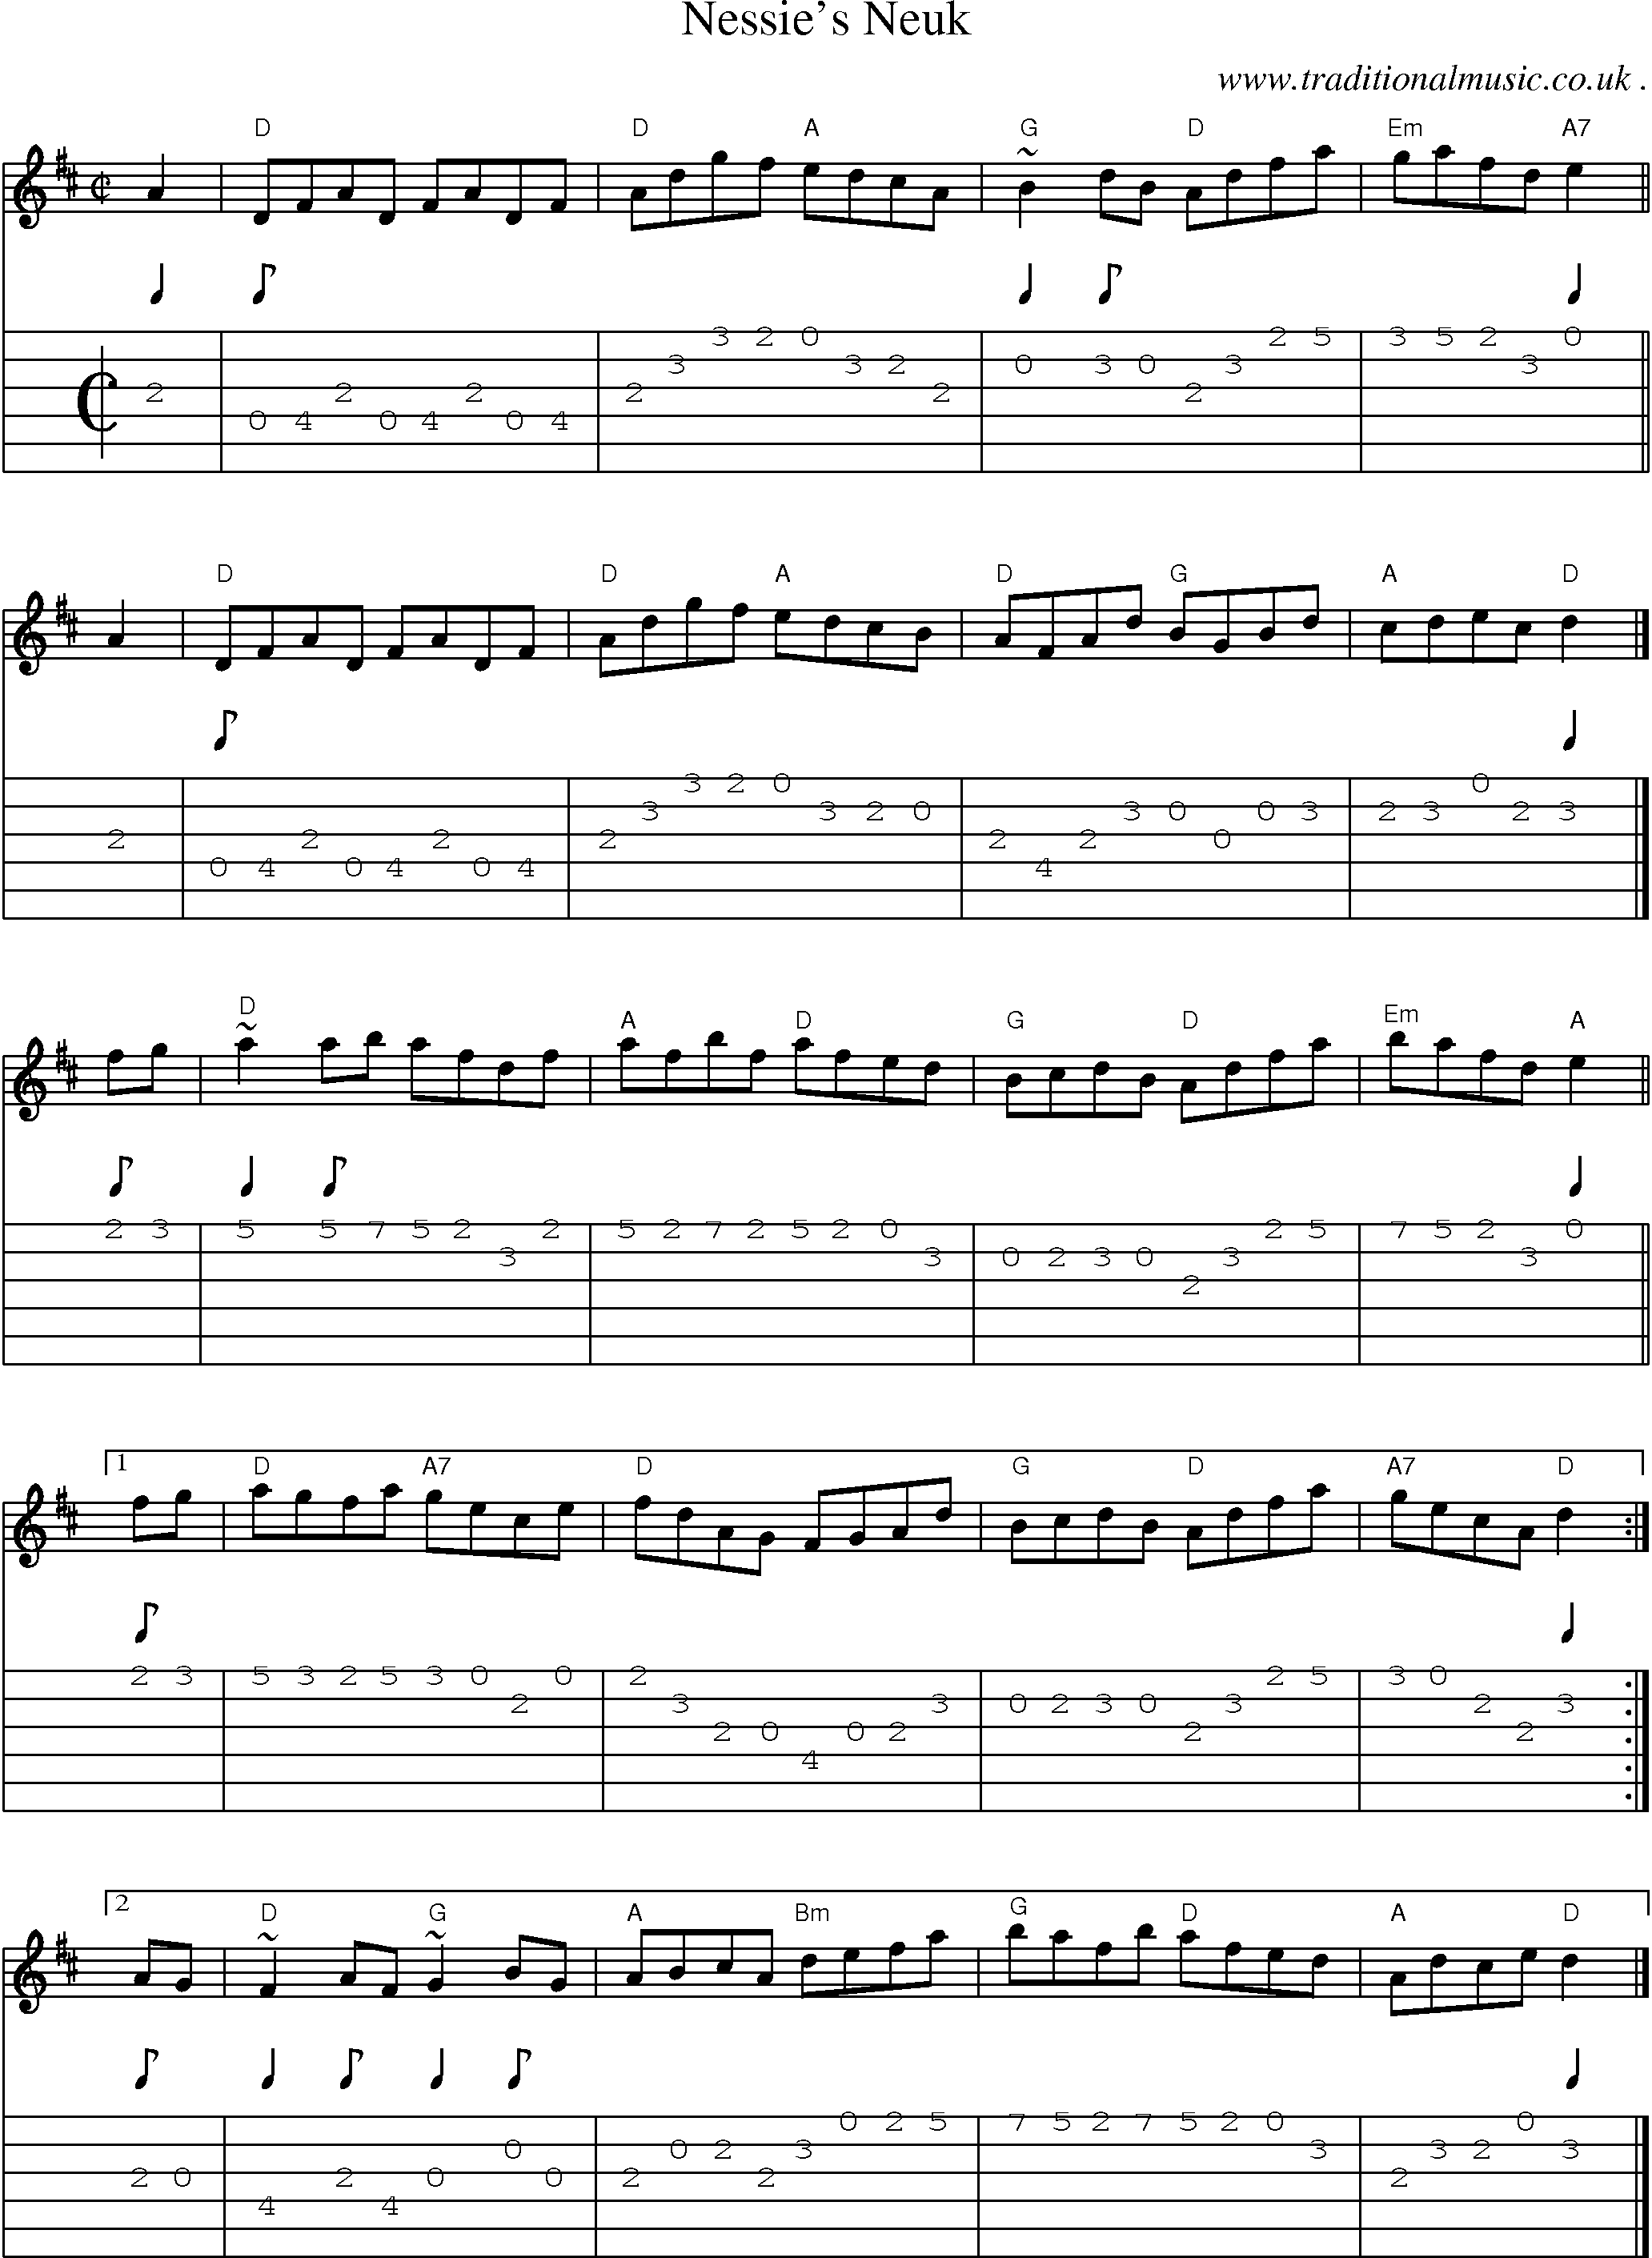 Sheet-music  score, Chords and Guitar Tabs for Nessies Neuk